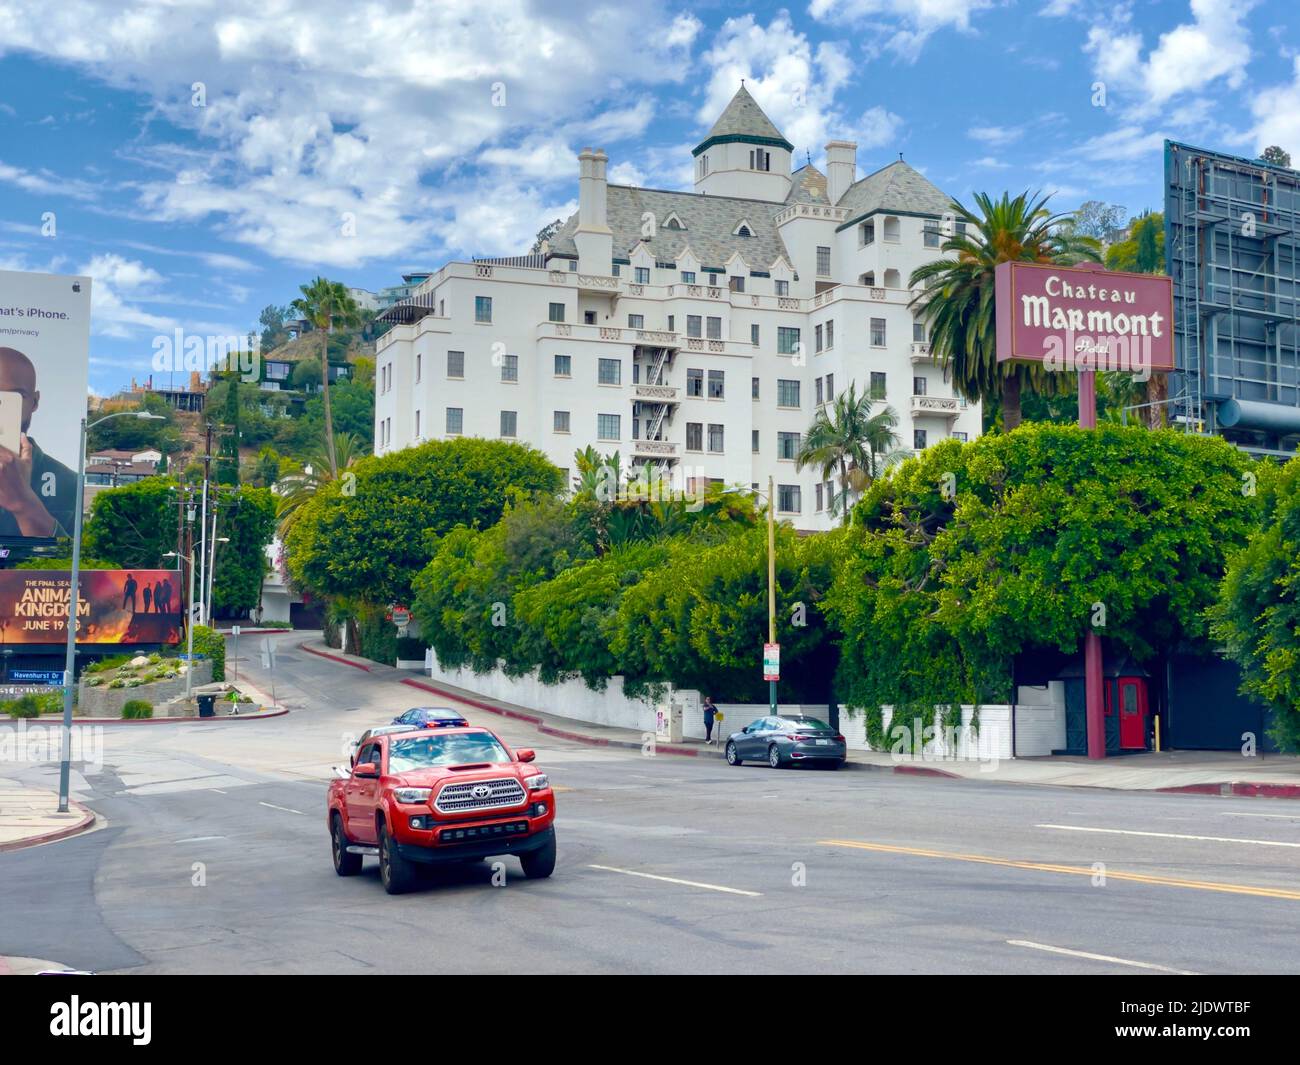 Chateau Marmont, hotel, Sunset Strip, West Hollywood, Los Ángeles, APROX Foto de stock